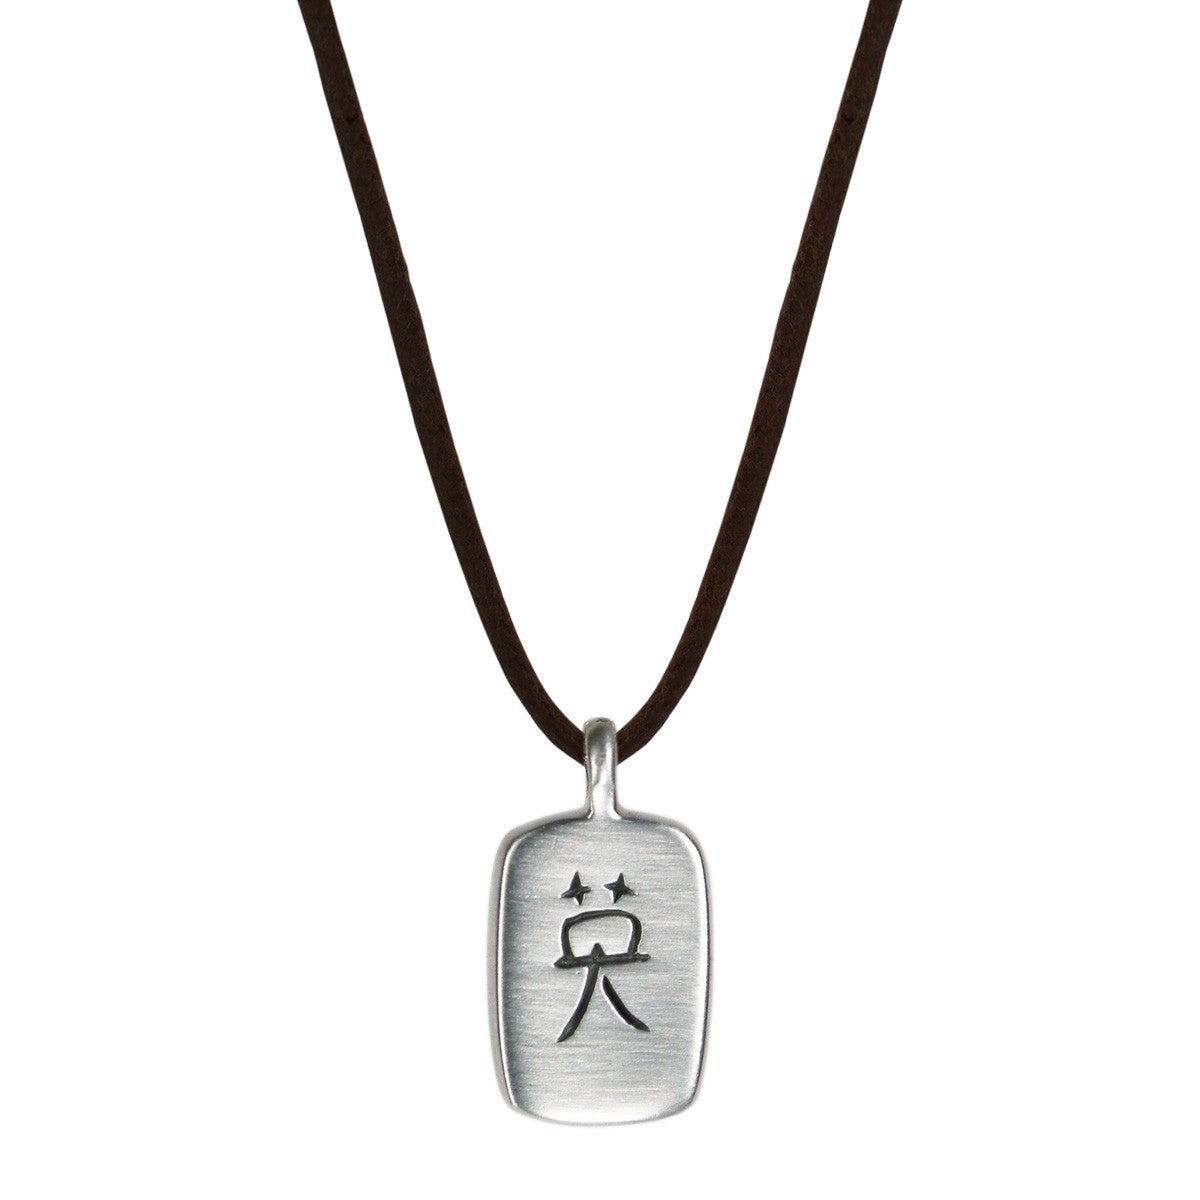 Men's Sterling Silver Courage Pendant on Black Cord